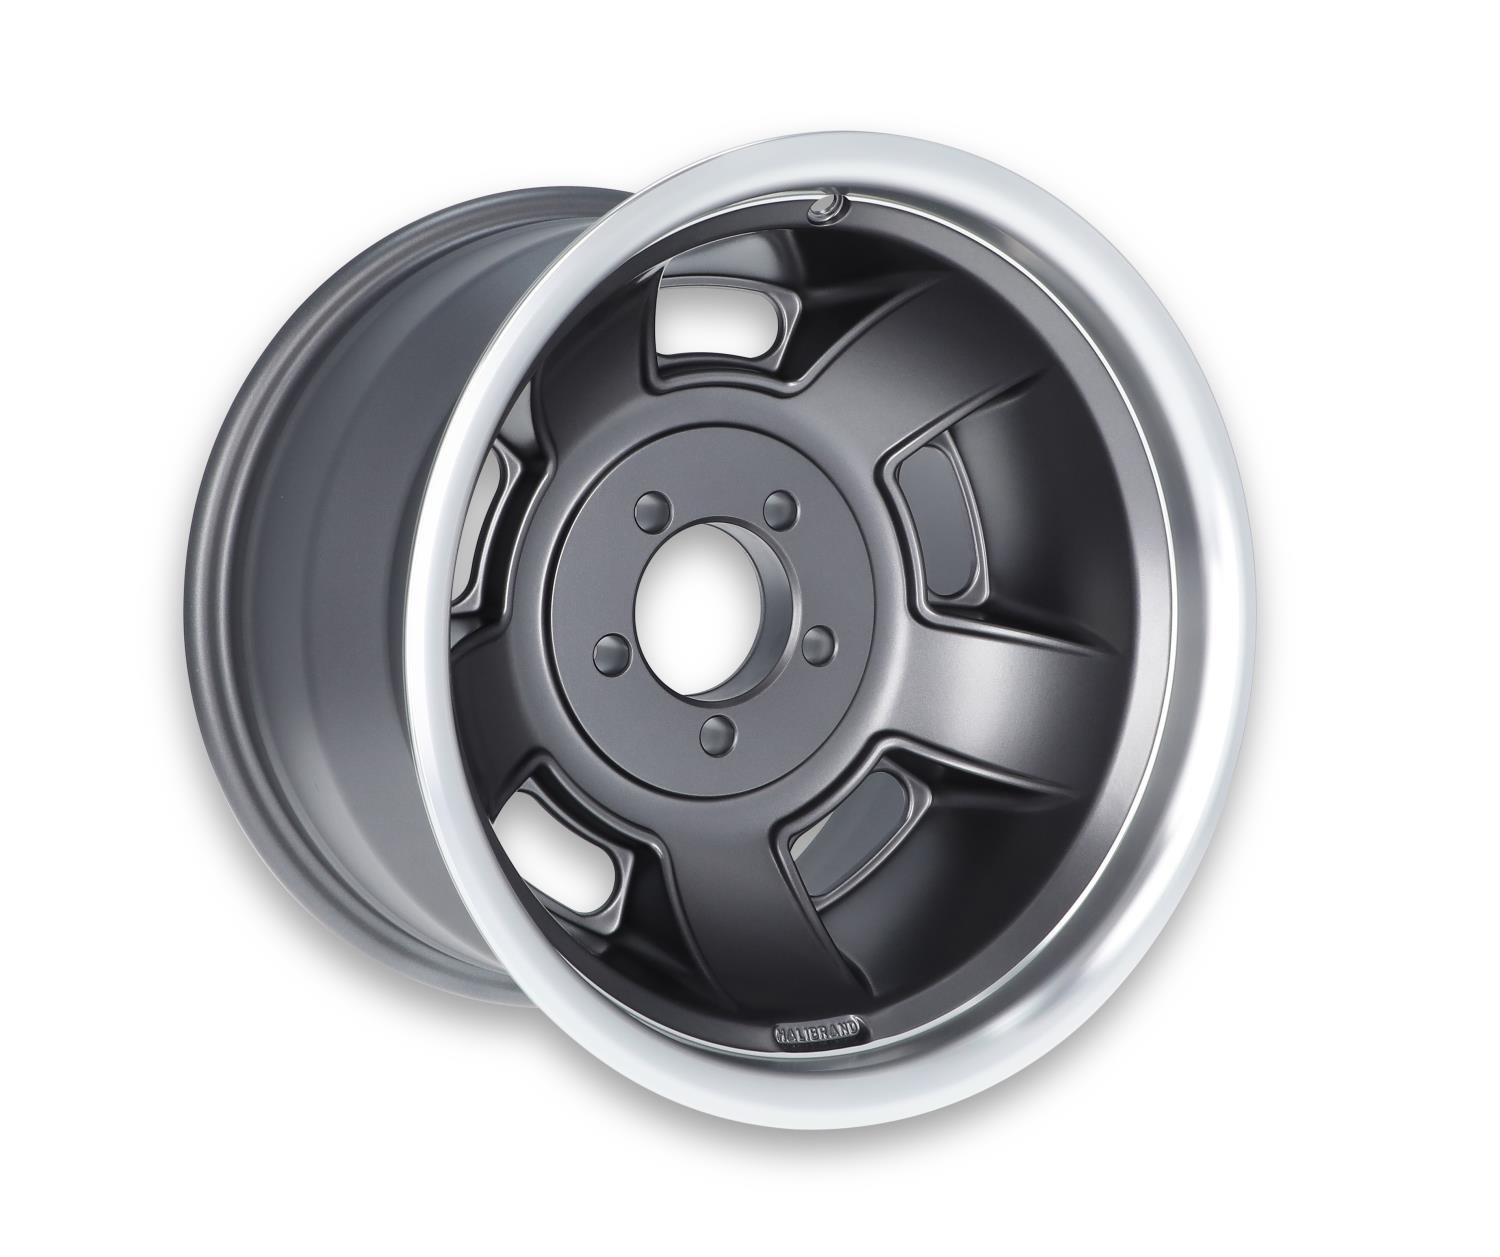 Sprint Rear Wheel, Size: 15x10", Bolt Pattern: 5x4.5", Backspace: 4.25" [Anthracite with Machined Lip - Semi Gloss Clearcoat]